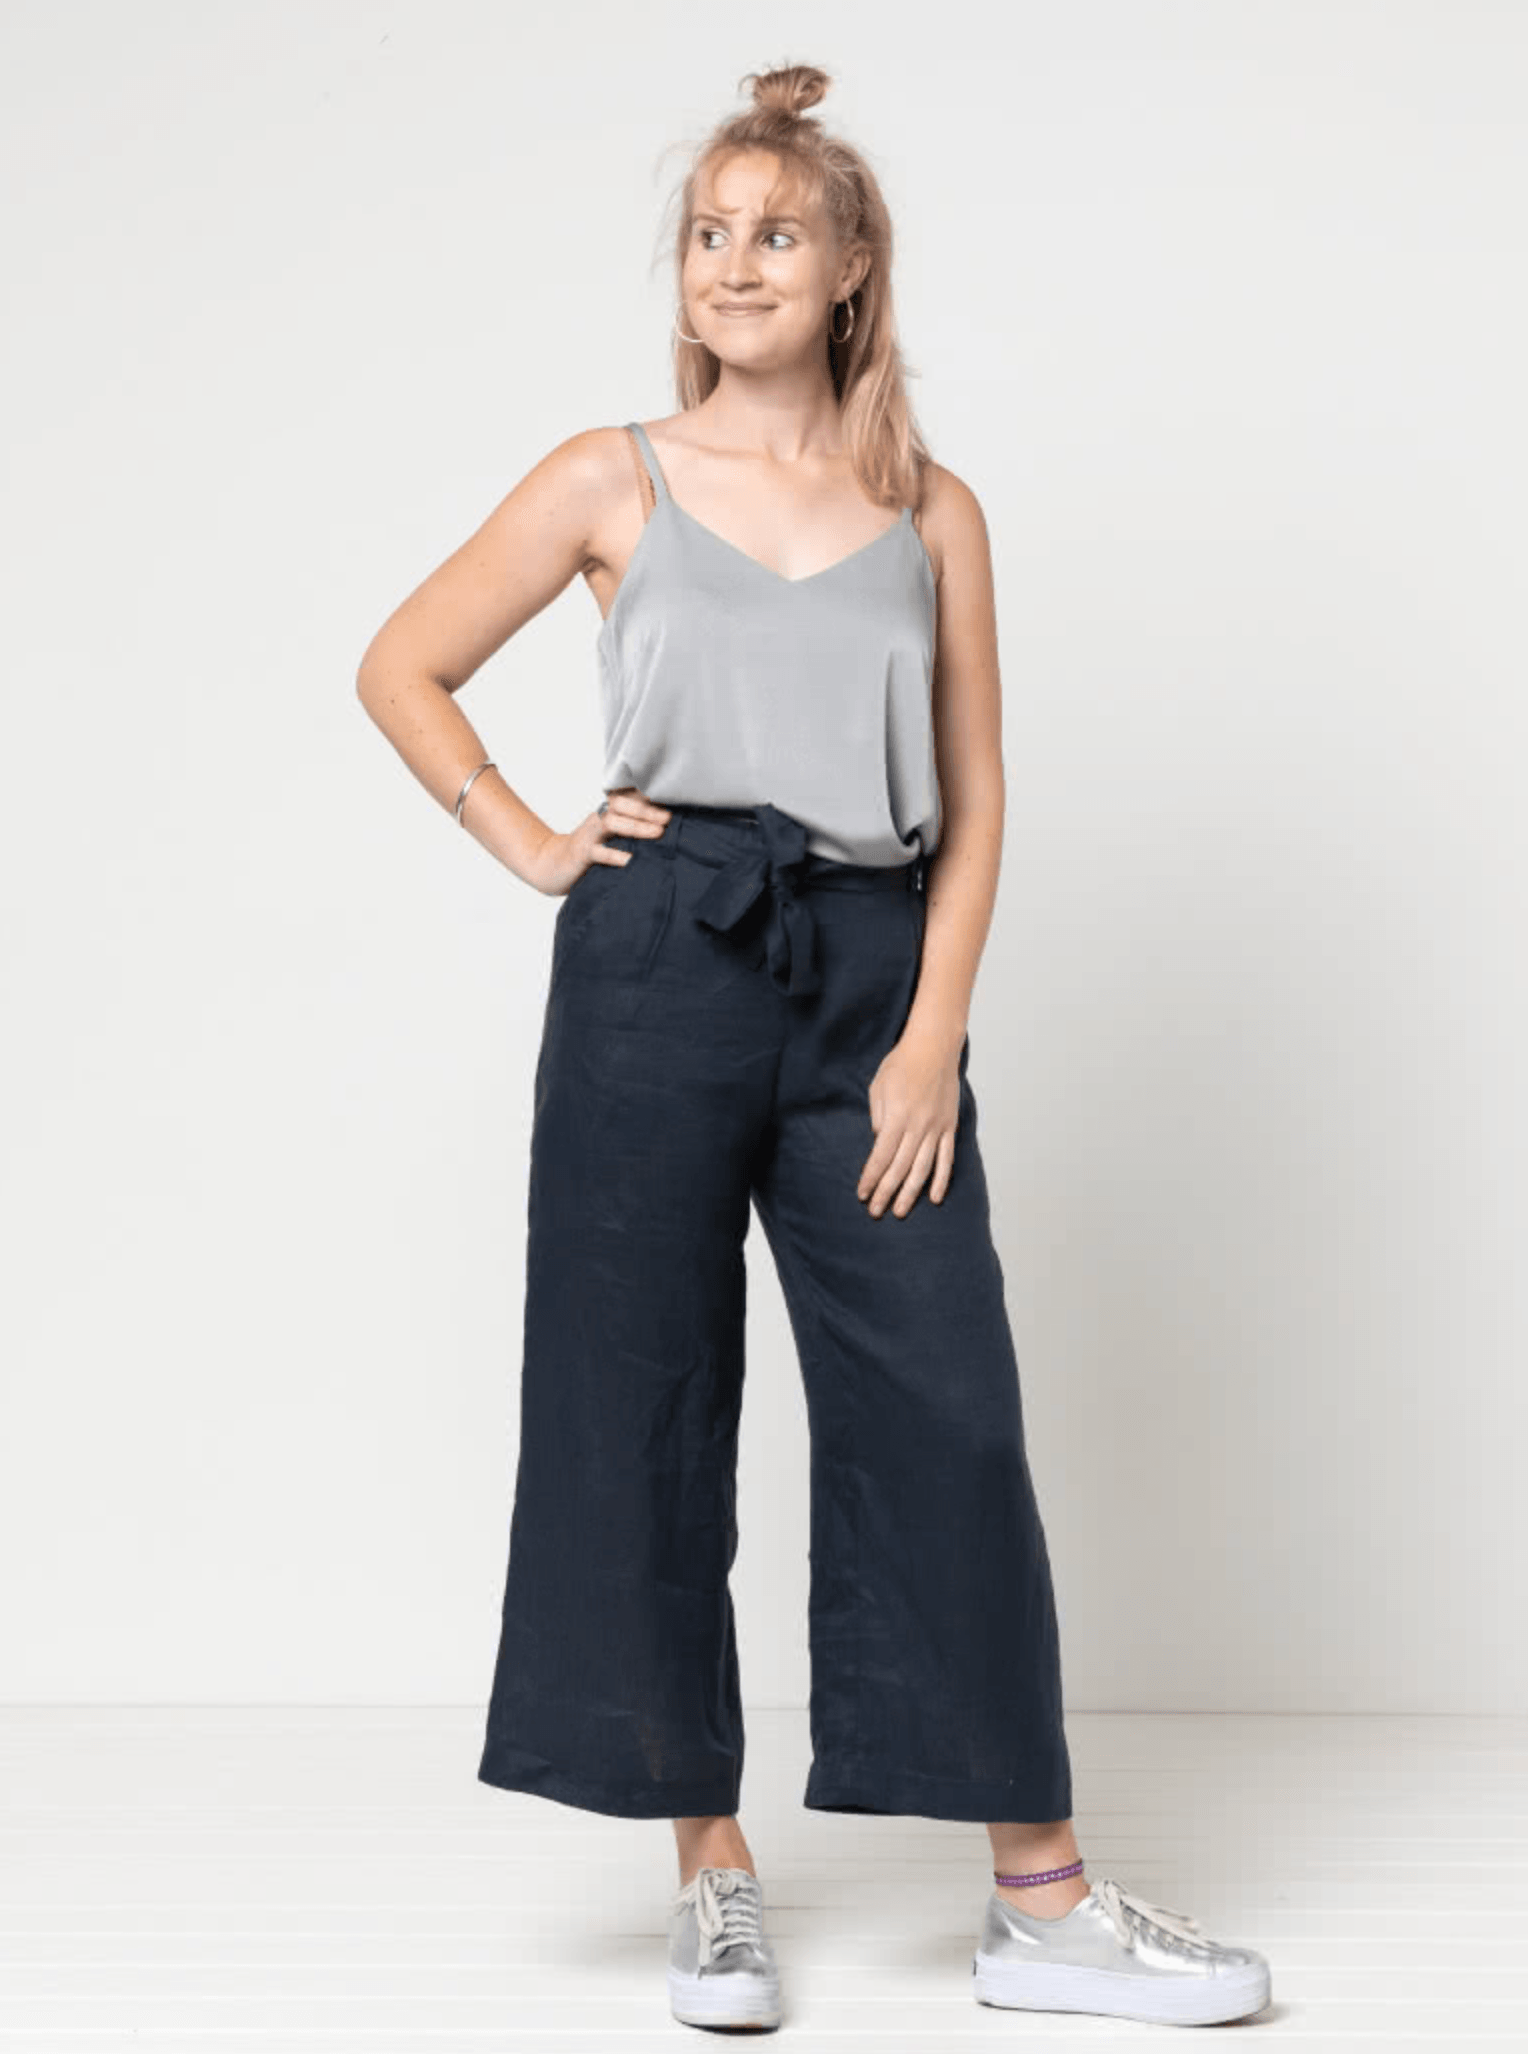 Style Arc Clare Pant Sizes 18 - 30